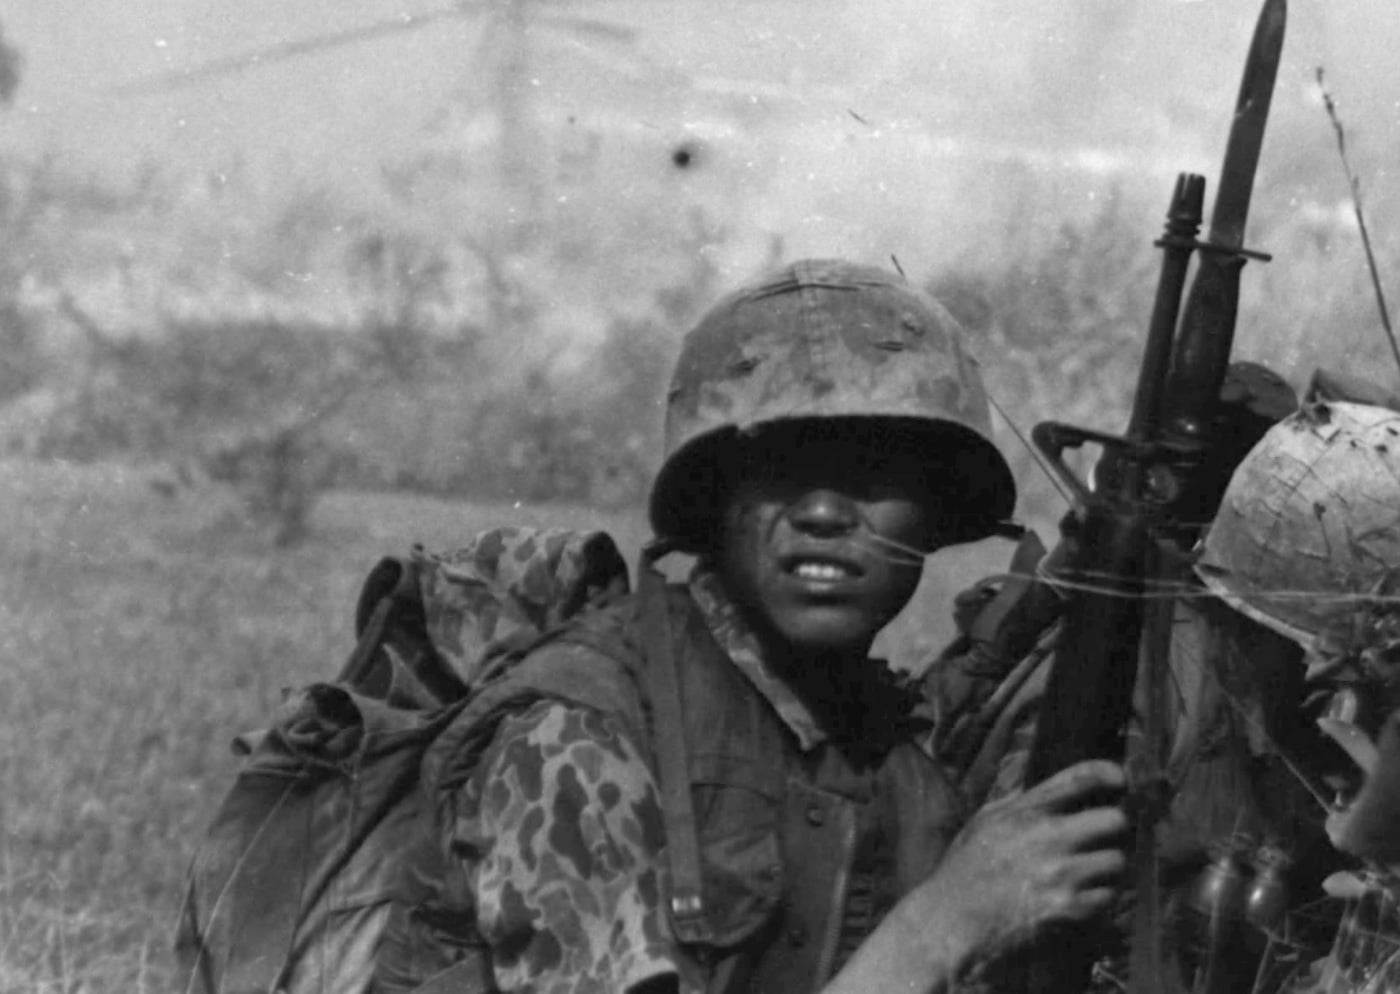 This photo shows a South Korea Marine of the Blue Dragons with a M16 rifle, bayonet, helmet and camouflage uniform. He is taking cover behind a hedgerow while waiting on an order from his sergeant to start the search and destroy mission looking for Viet Cong communists in South Vietnam.